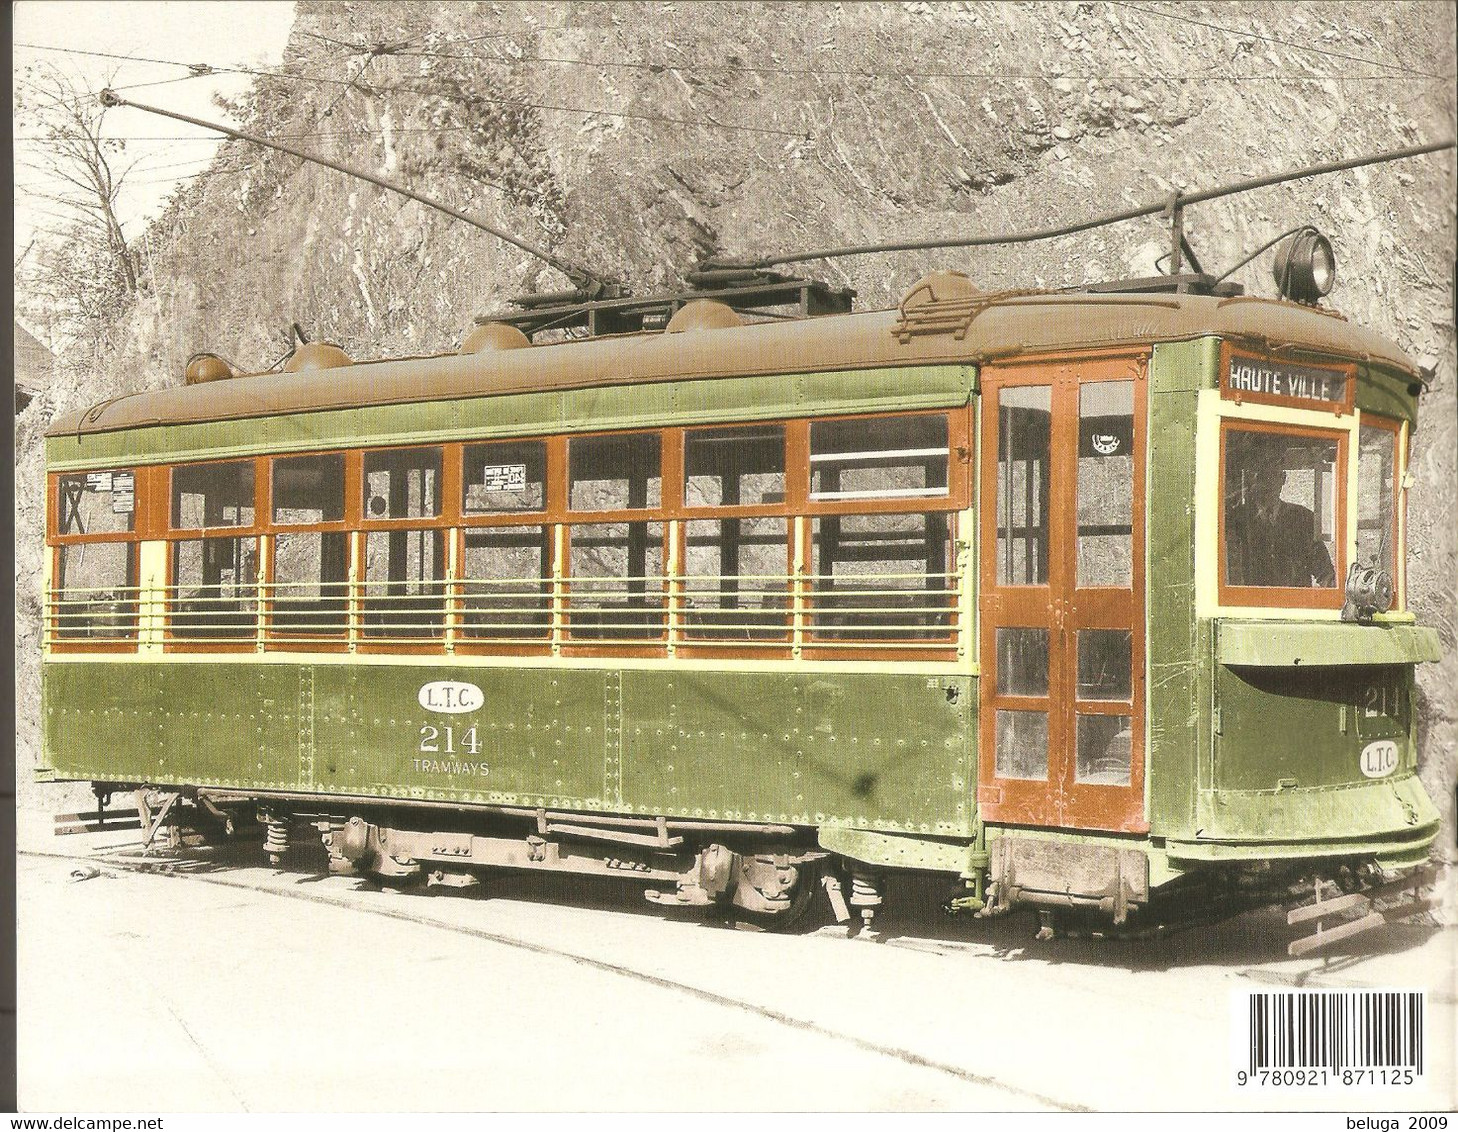 Levis Tramways Company Book Trolleys Many Pictures - Livre Tramways De Lévis Quebec Canada - ISBN 9780921871132 - Canada